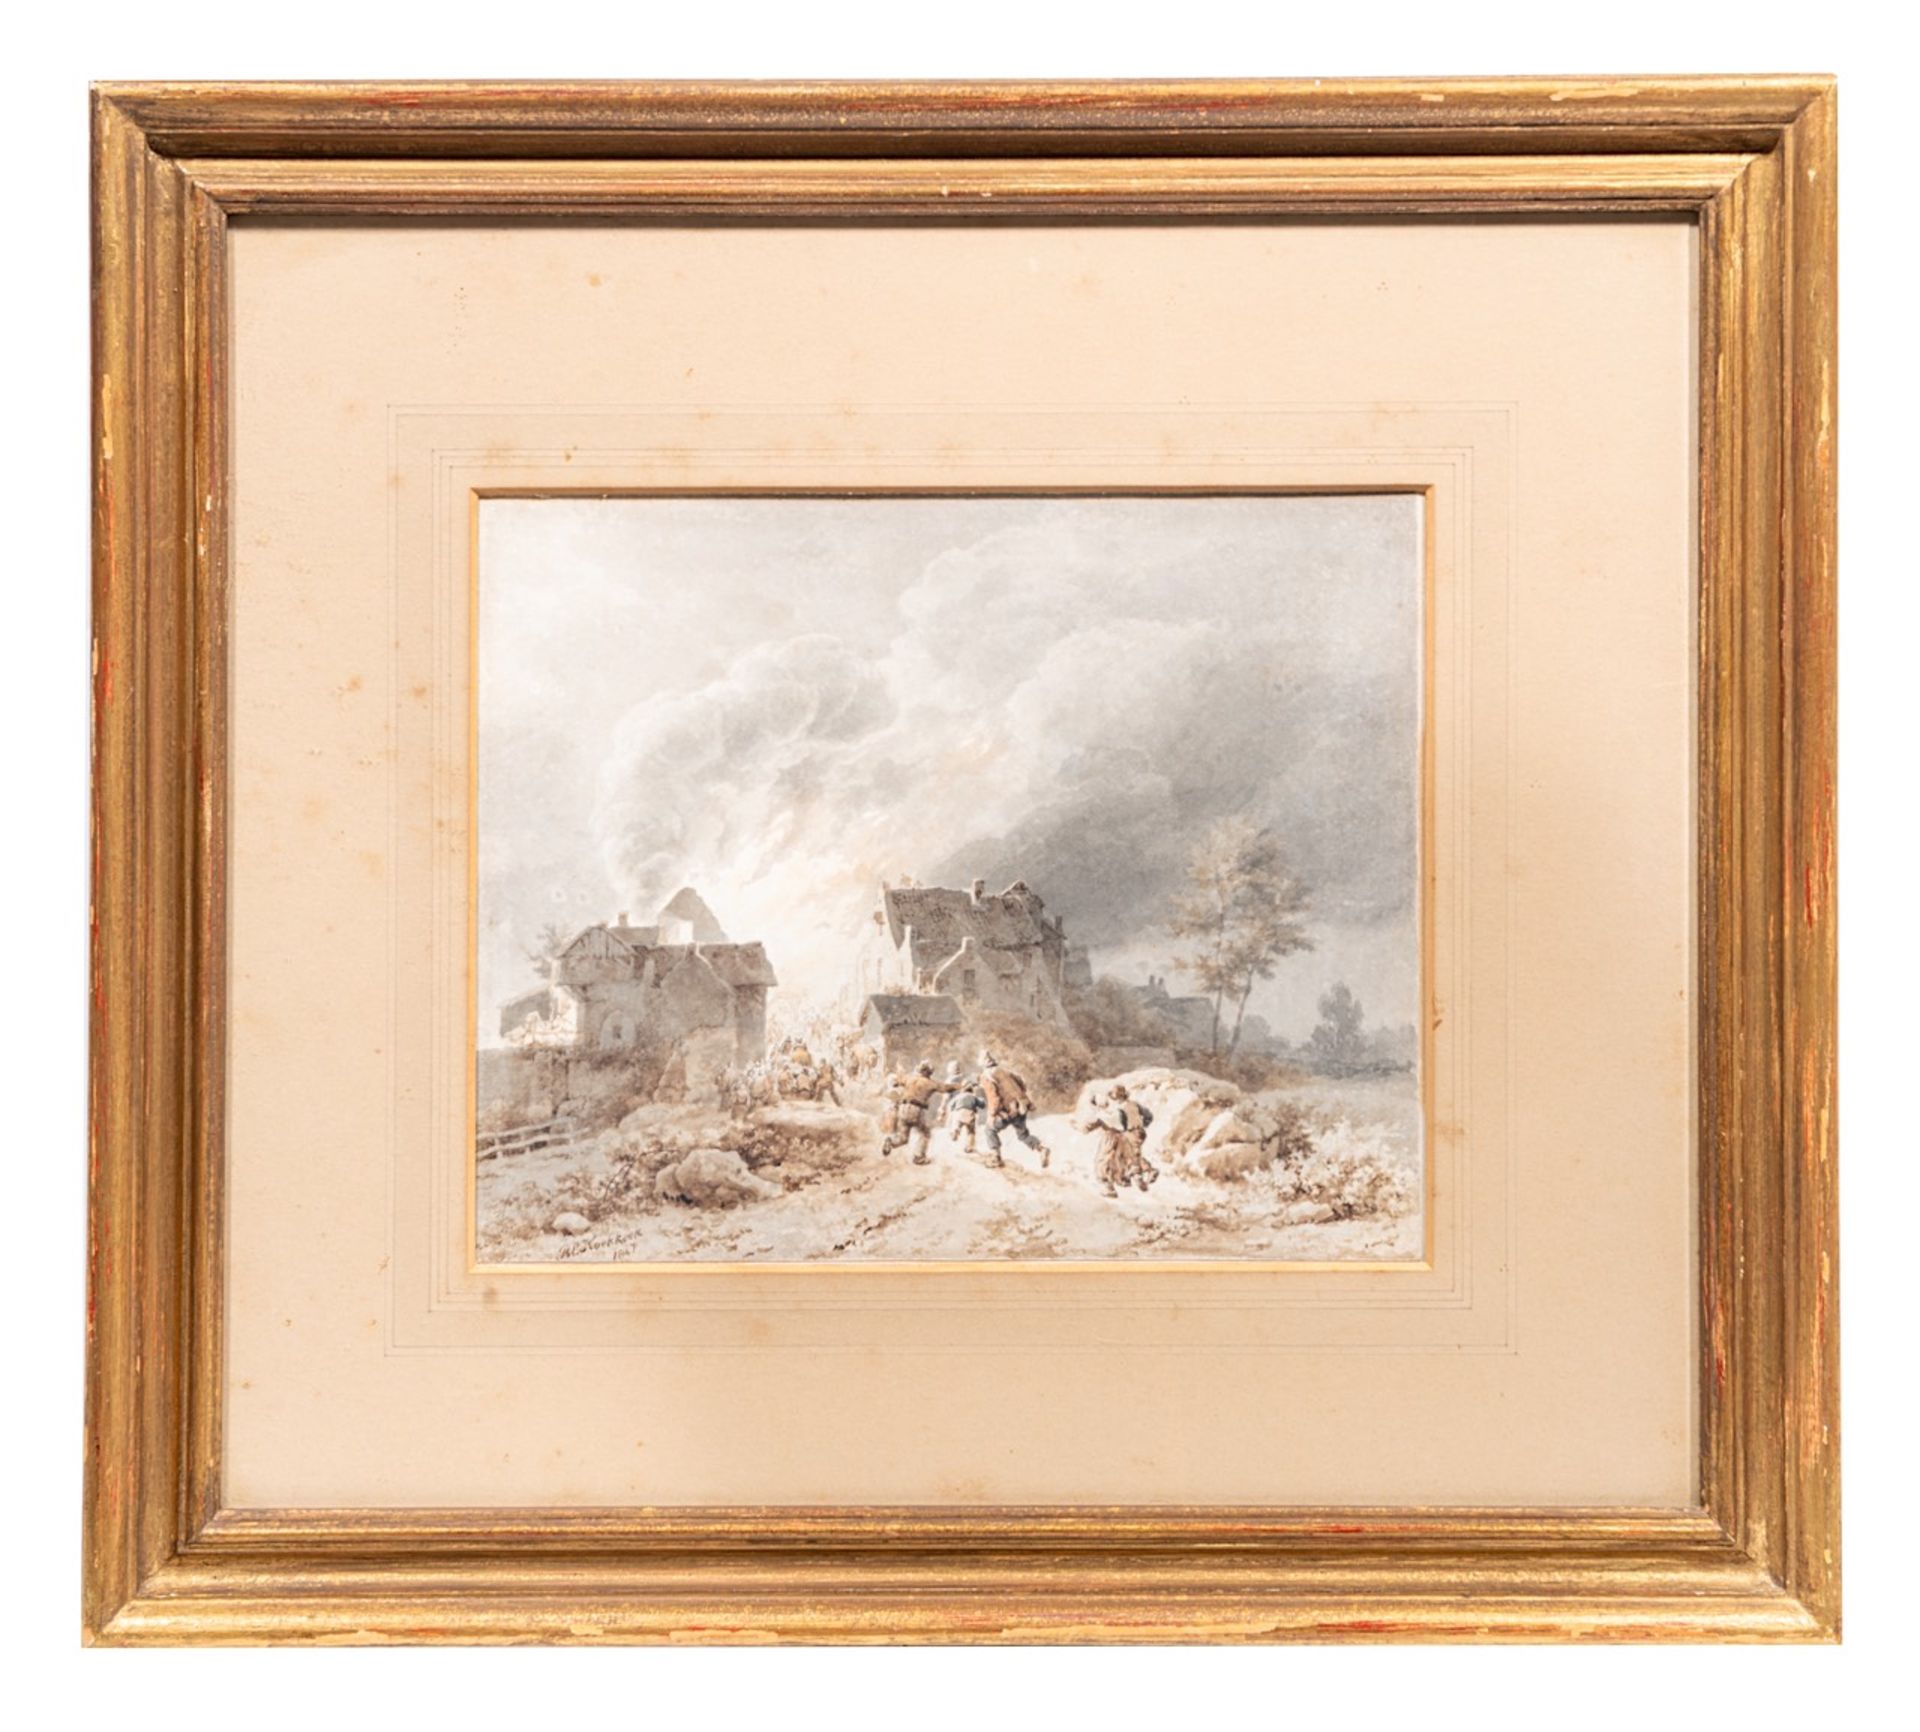 Barend Cornelis Koekoek (1803-1862), a rural village shocked by a fire, 1847, watercolour and pencil - Image 2 of 6